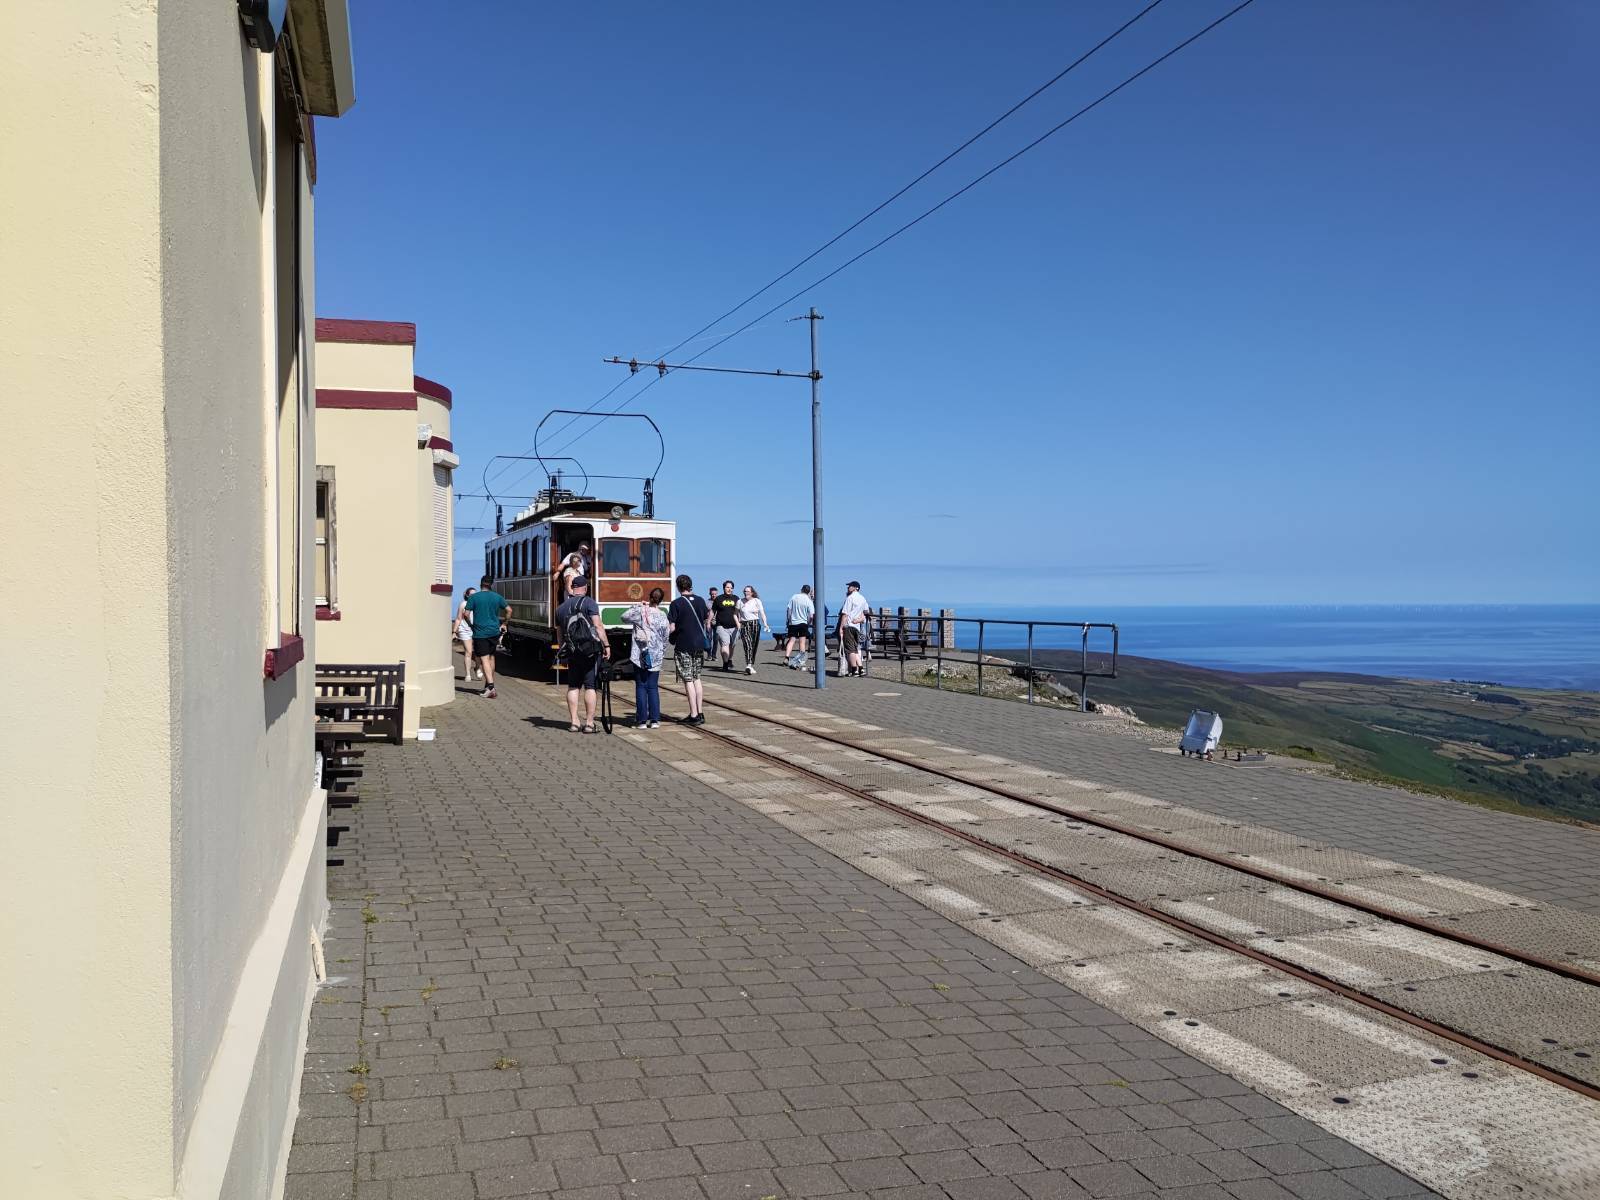 At the summit is a nice café, and the terminus of the oldest electric tramway in the world, which has to circle the mountain to reach the peak.